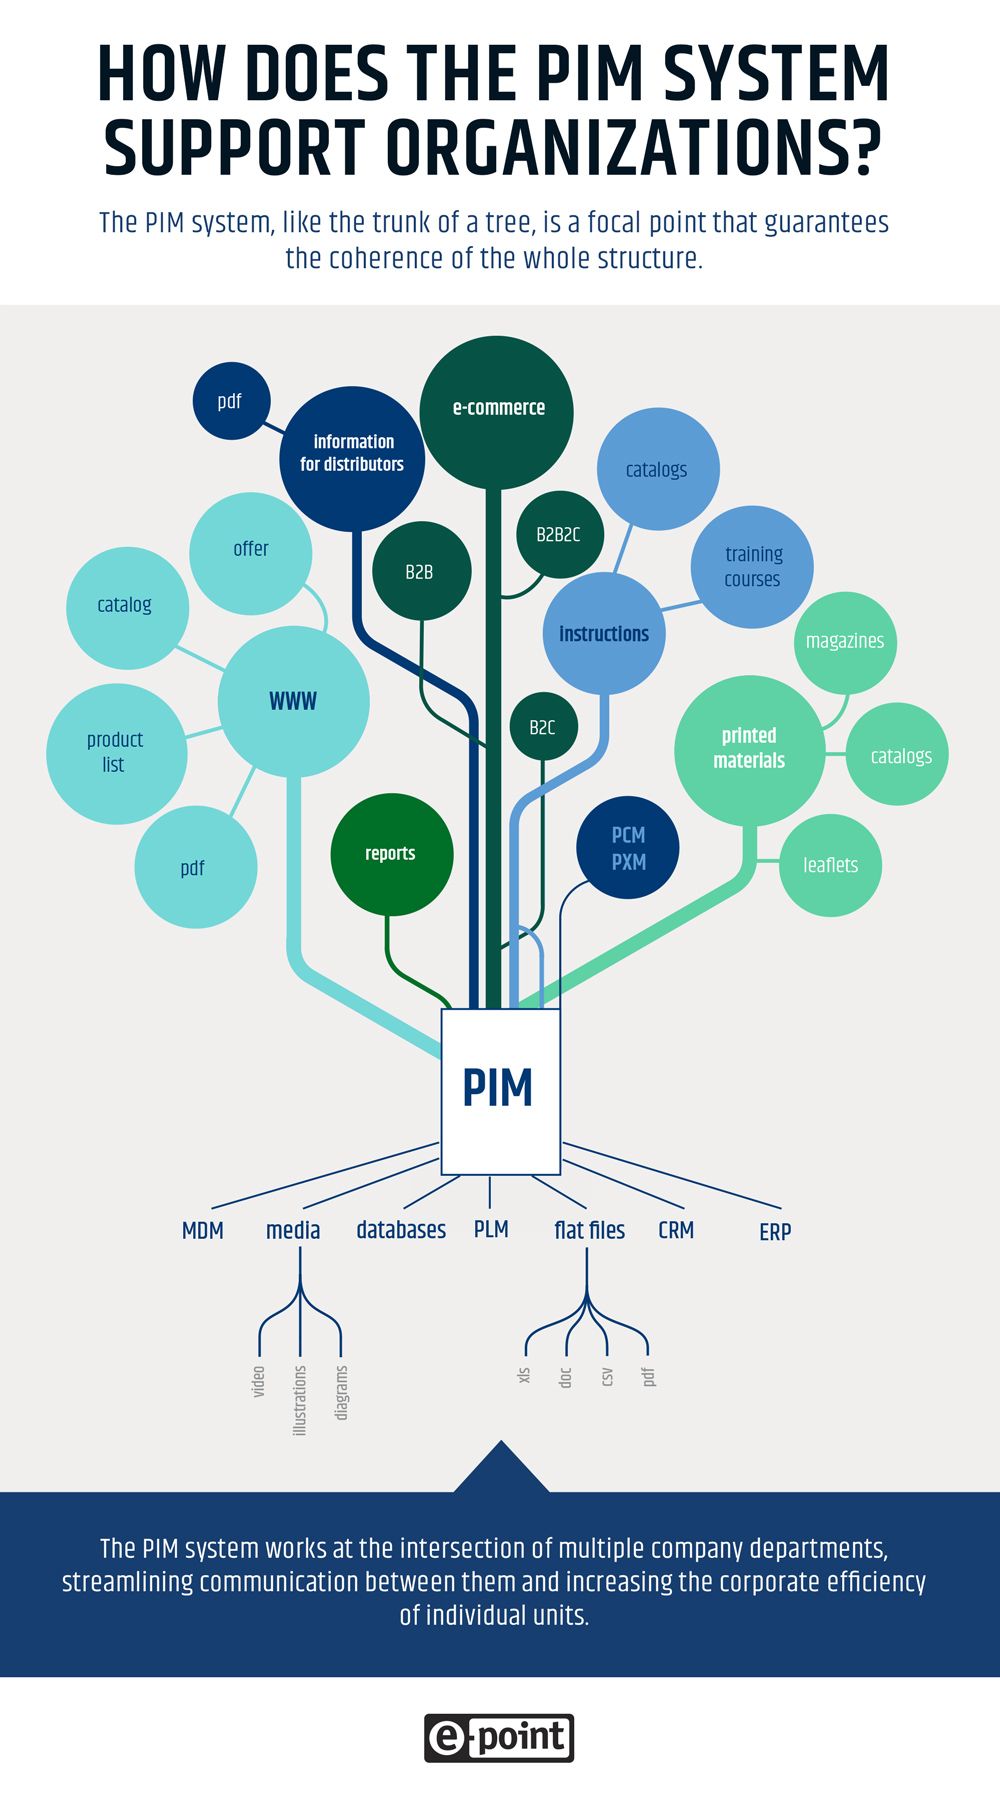 The PIM system, like the trunk of a tree, is a focal point that guarantees the coherence of the whole structure.